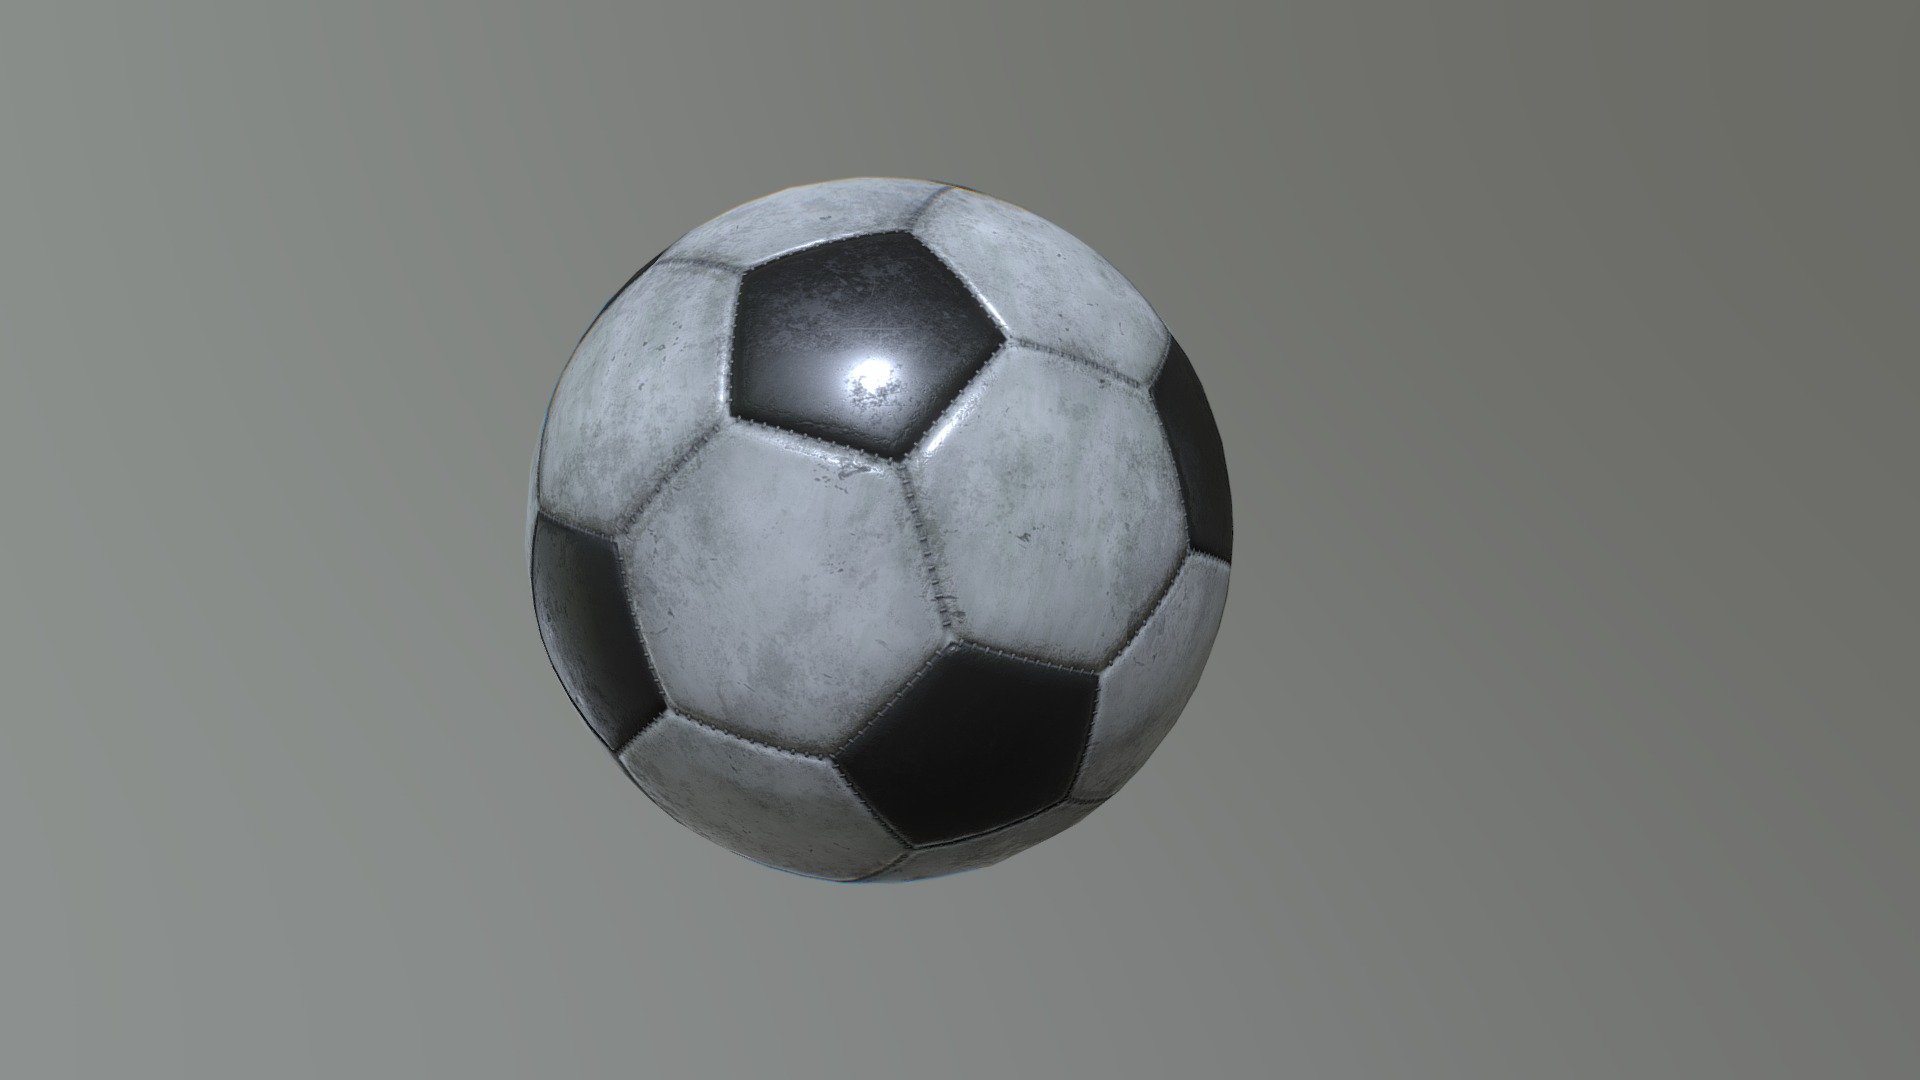 Old Football/Soccerball made with Blender and Substance Painter.
4K texture set
Archive contains:
3 LOD versions
UE4 and Unity textures
.OBJ and .FBX files versions - Football - 3D model by Ronald_RayGun 3d model